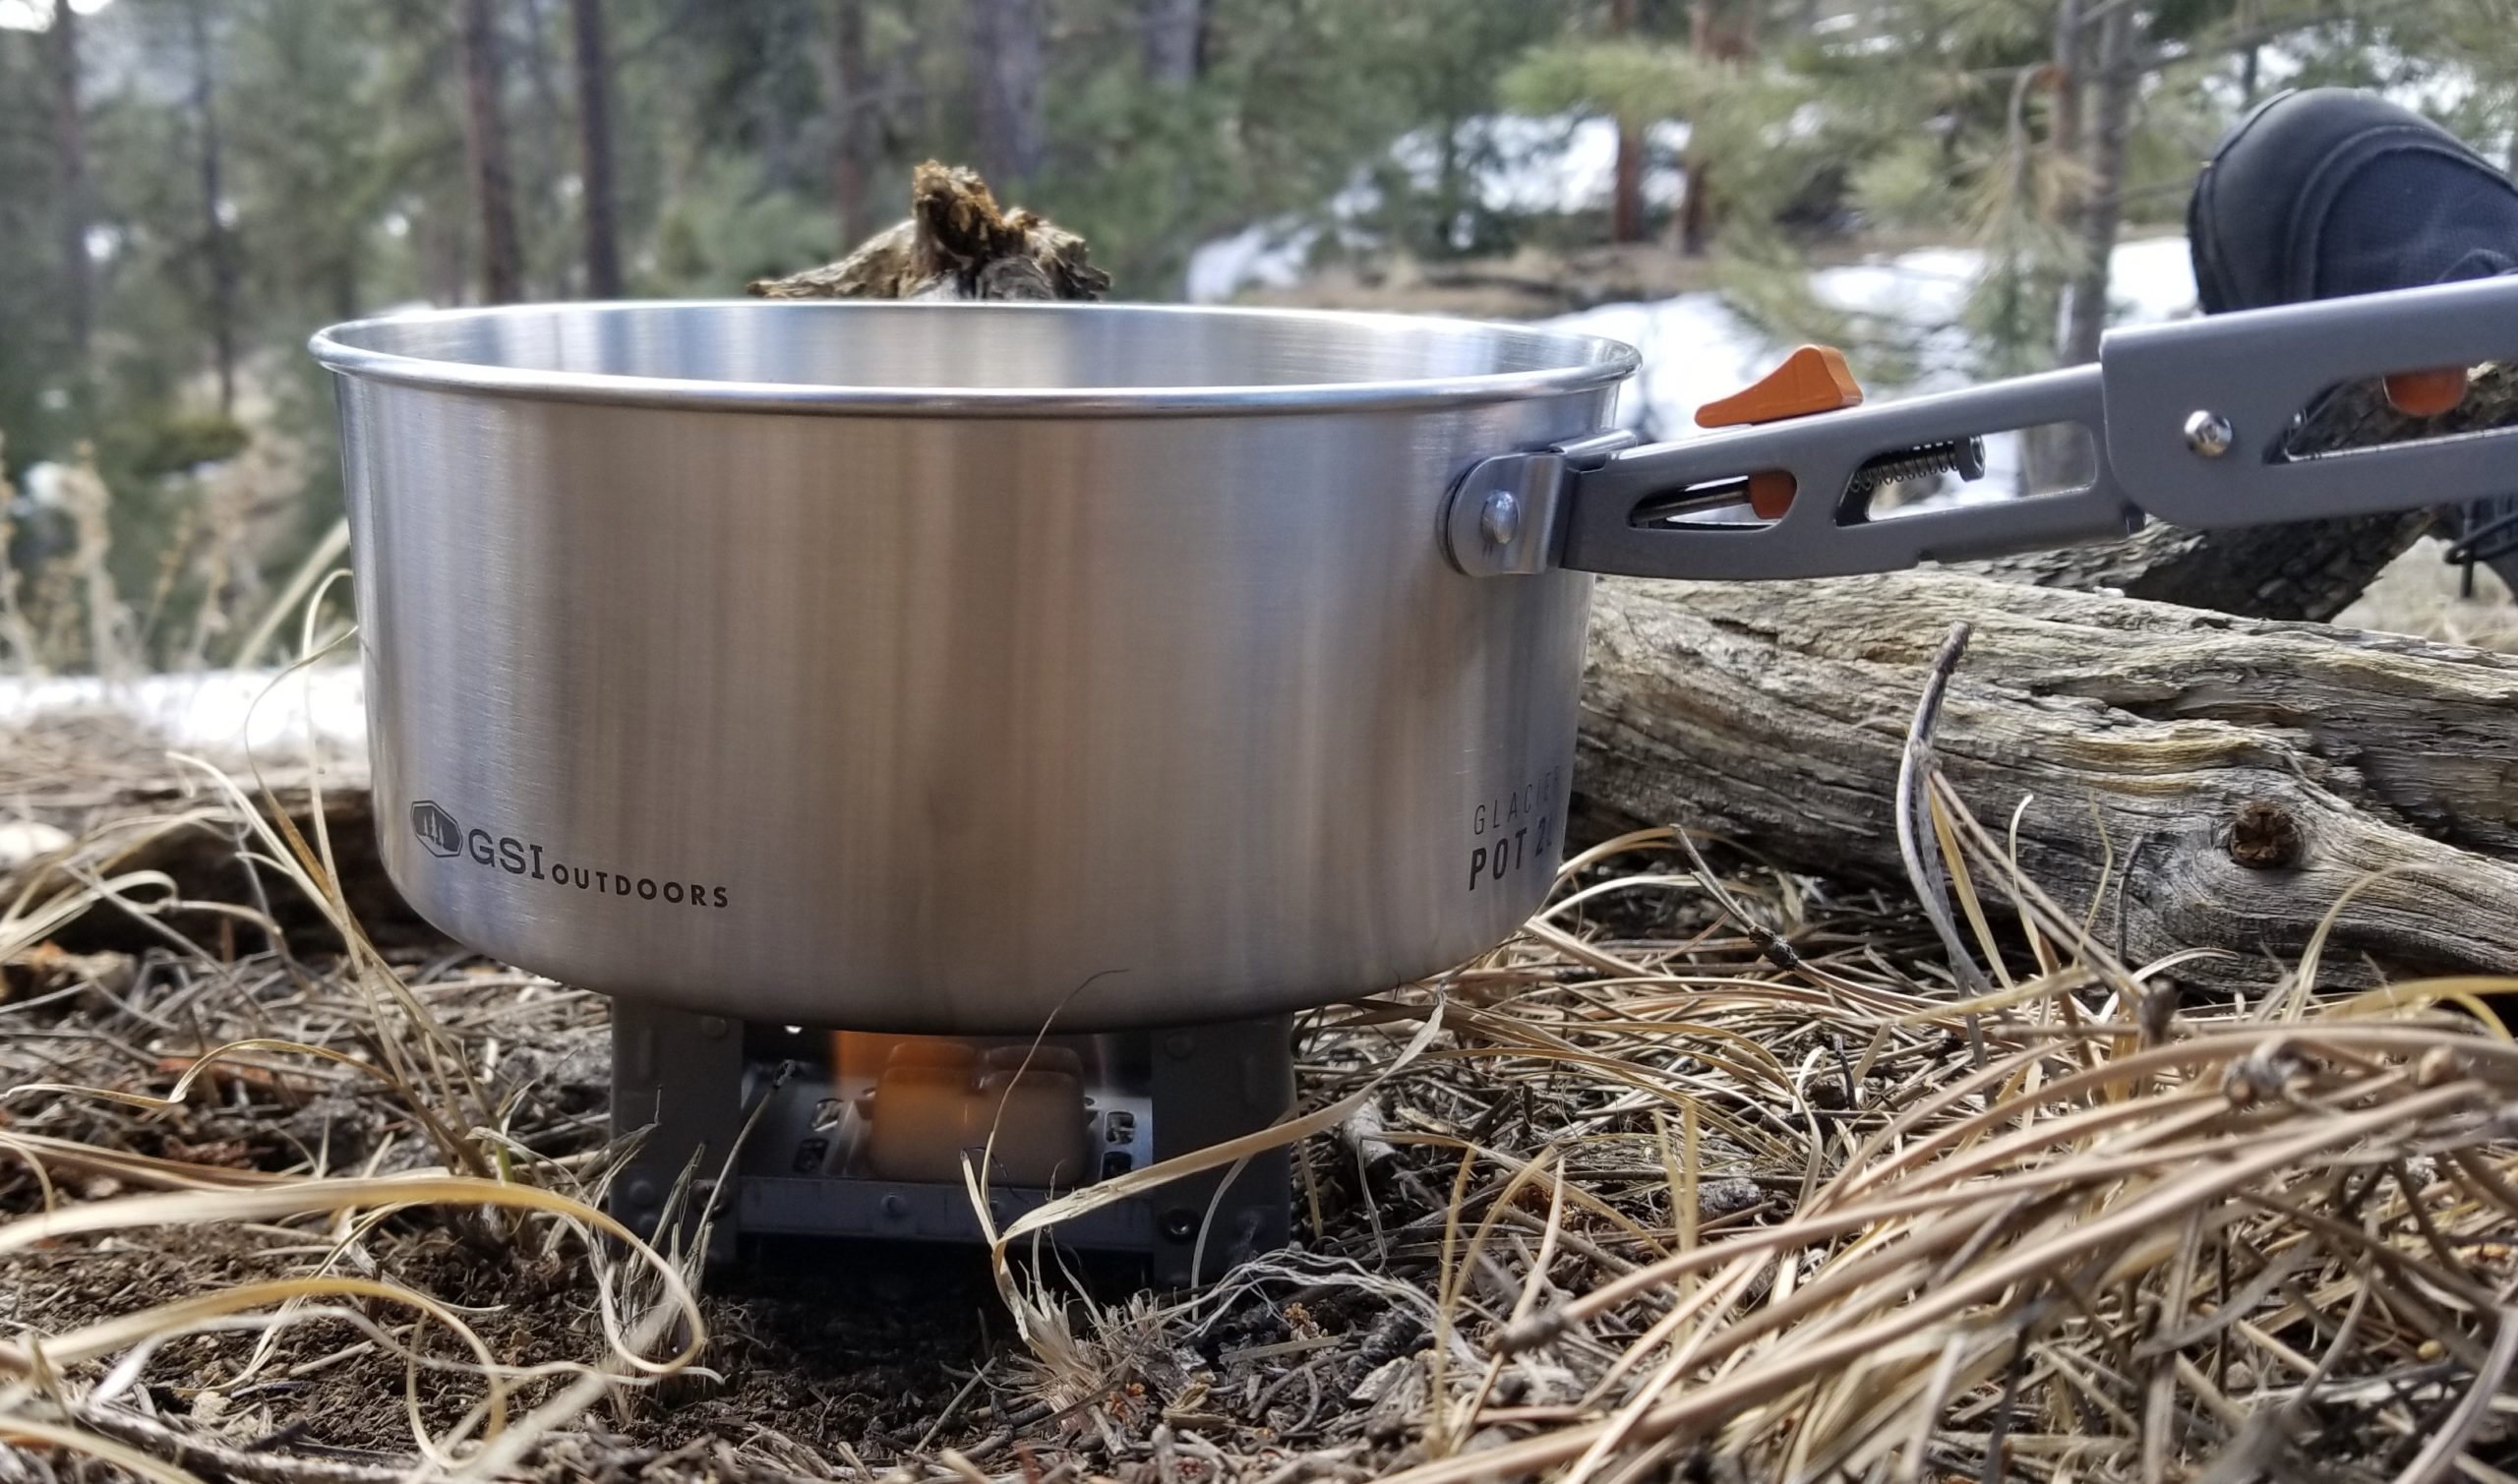 Getting back to nature with the Glacier Stainless Camper from GSI Outdoors